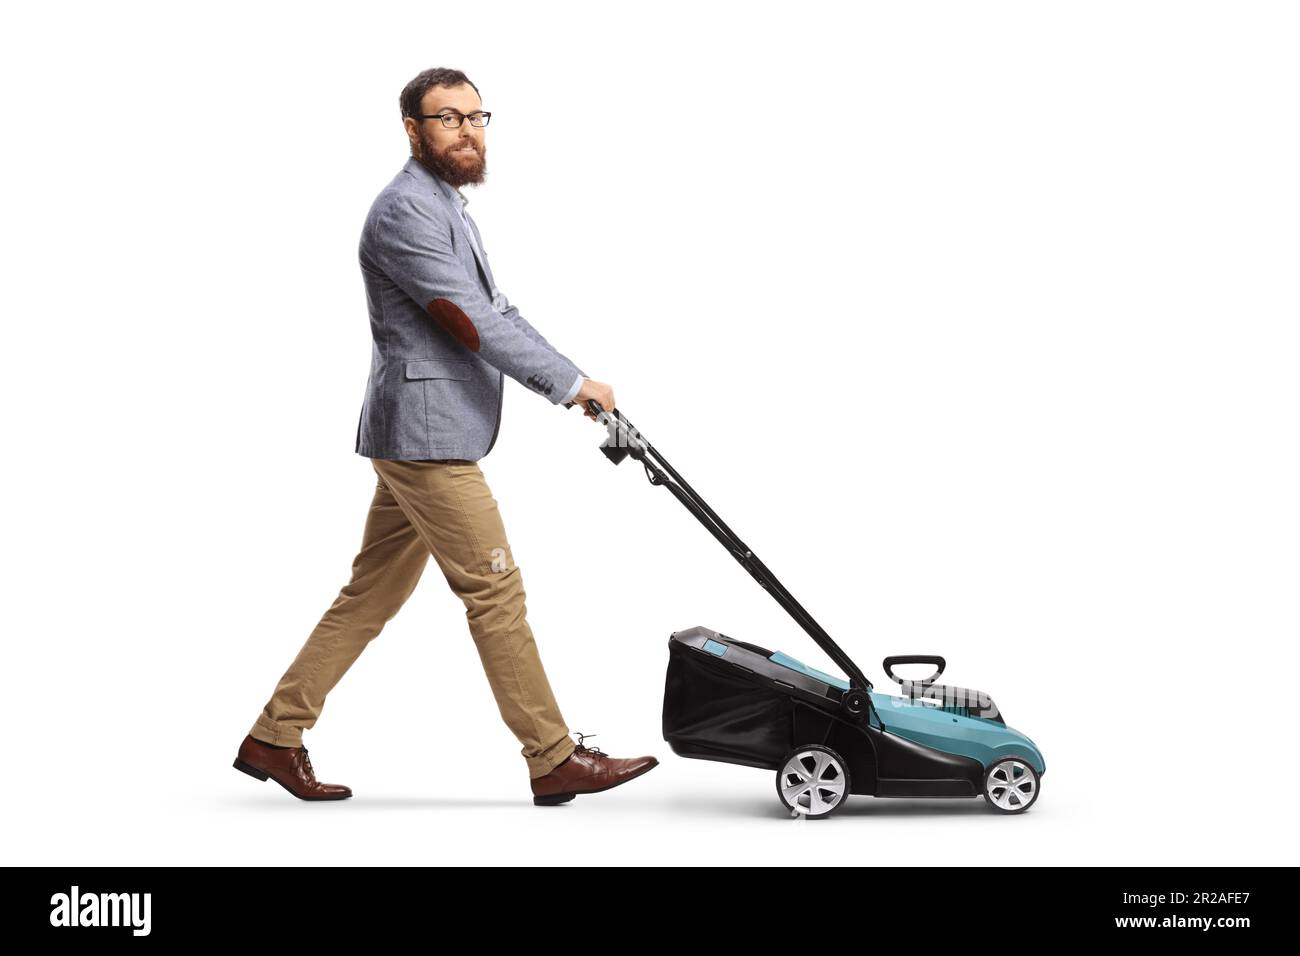 Full length shot of a man using a lawnmower and looking at camera isolated on white background Stock Photo